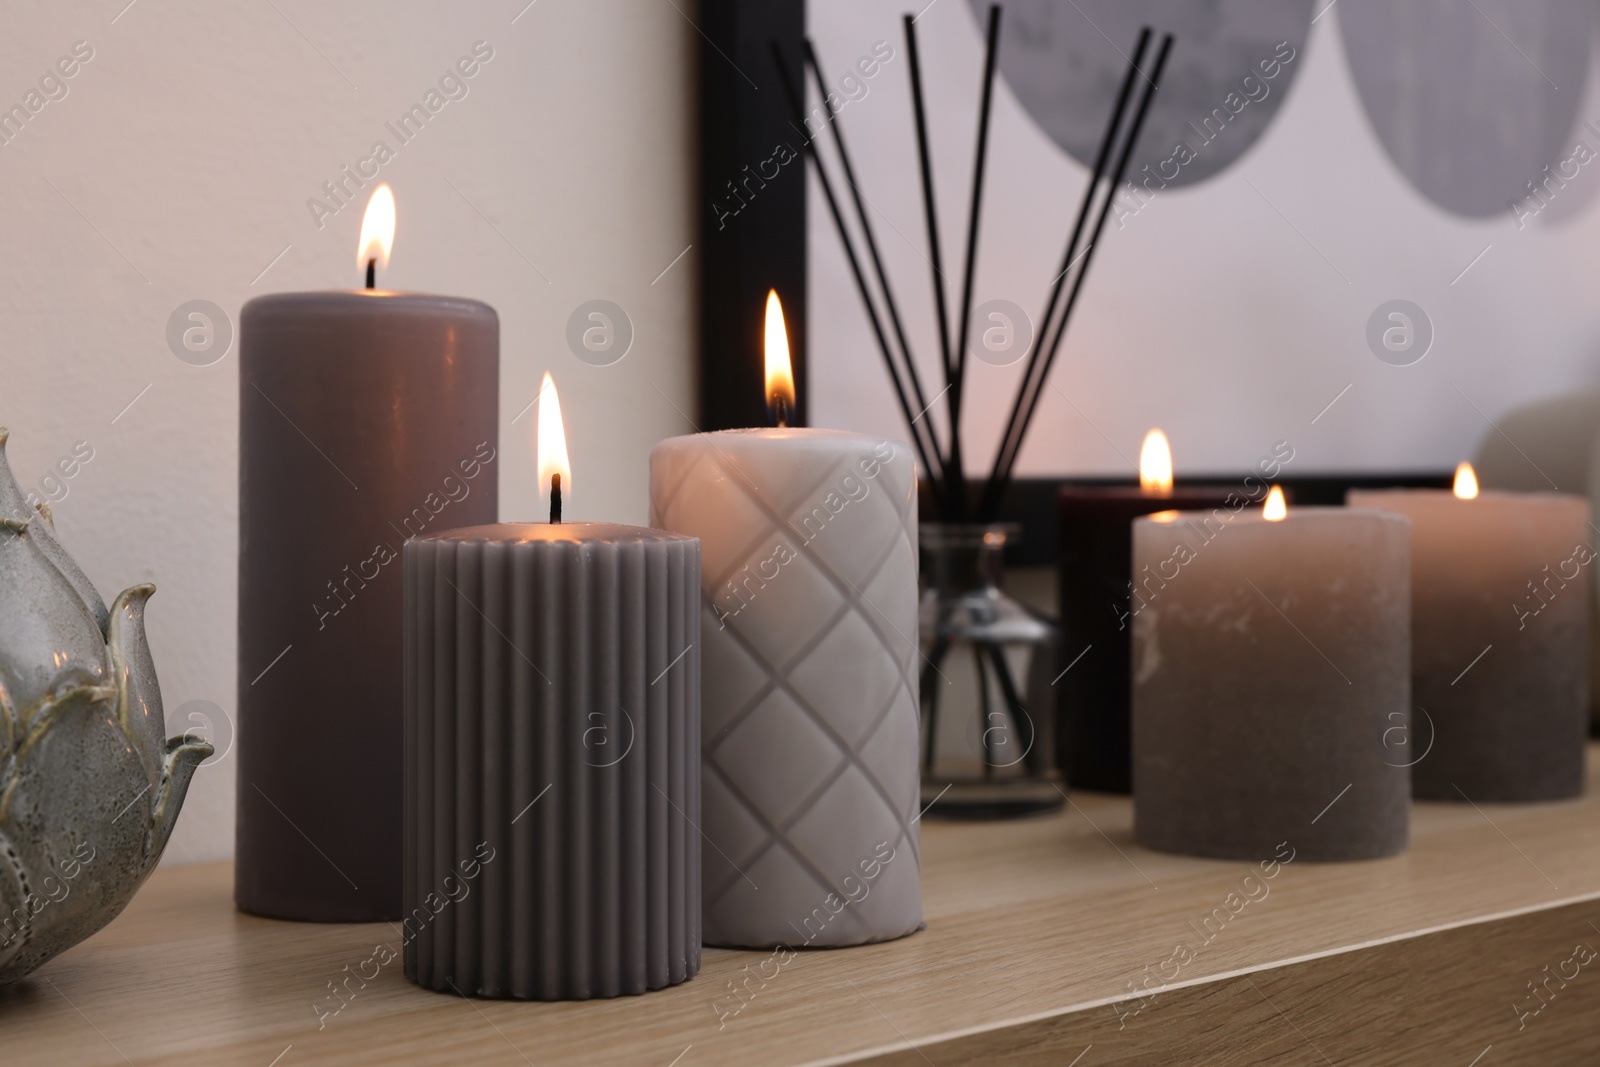 Photo of Burning candles and air freshener on wooden shelf indoors